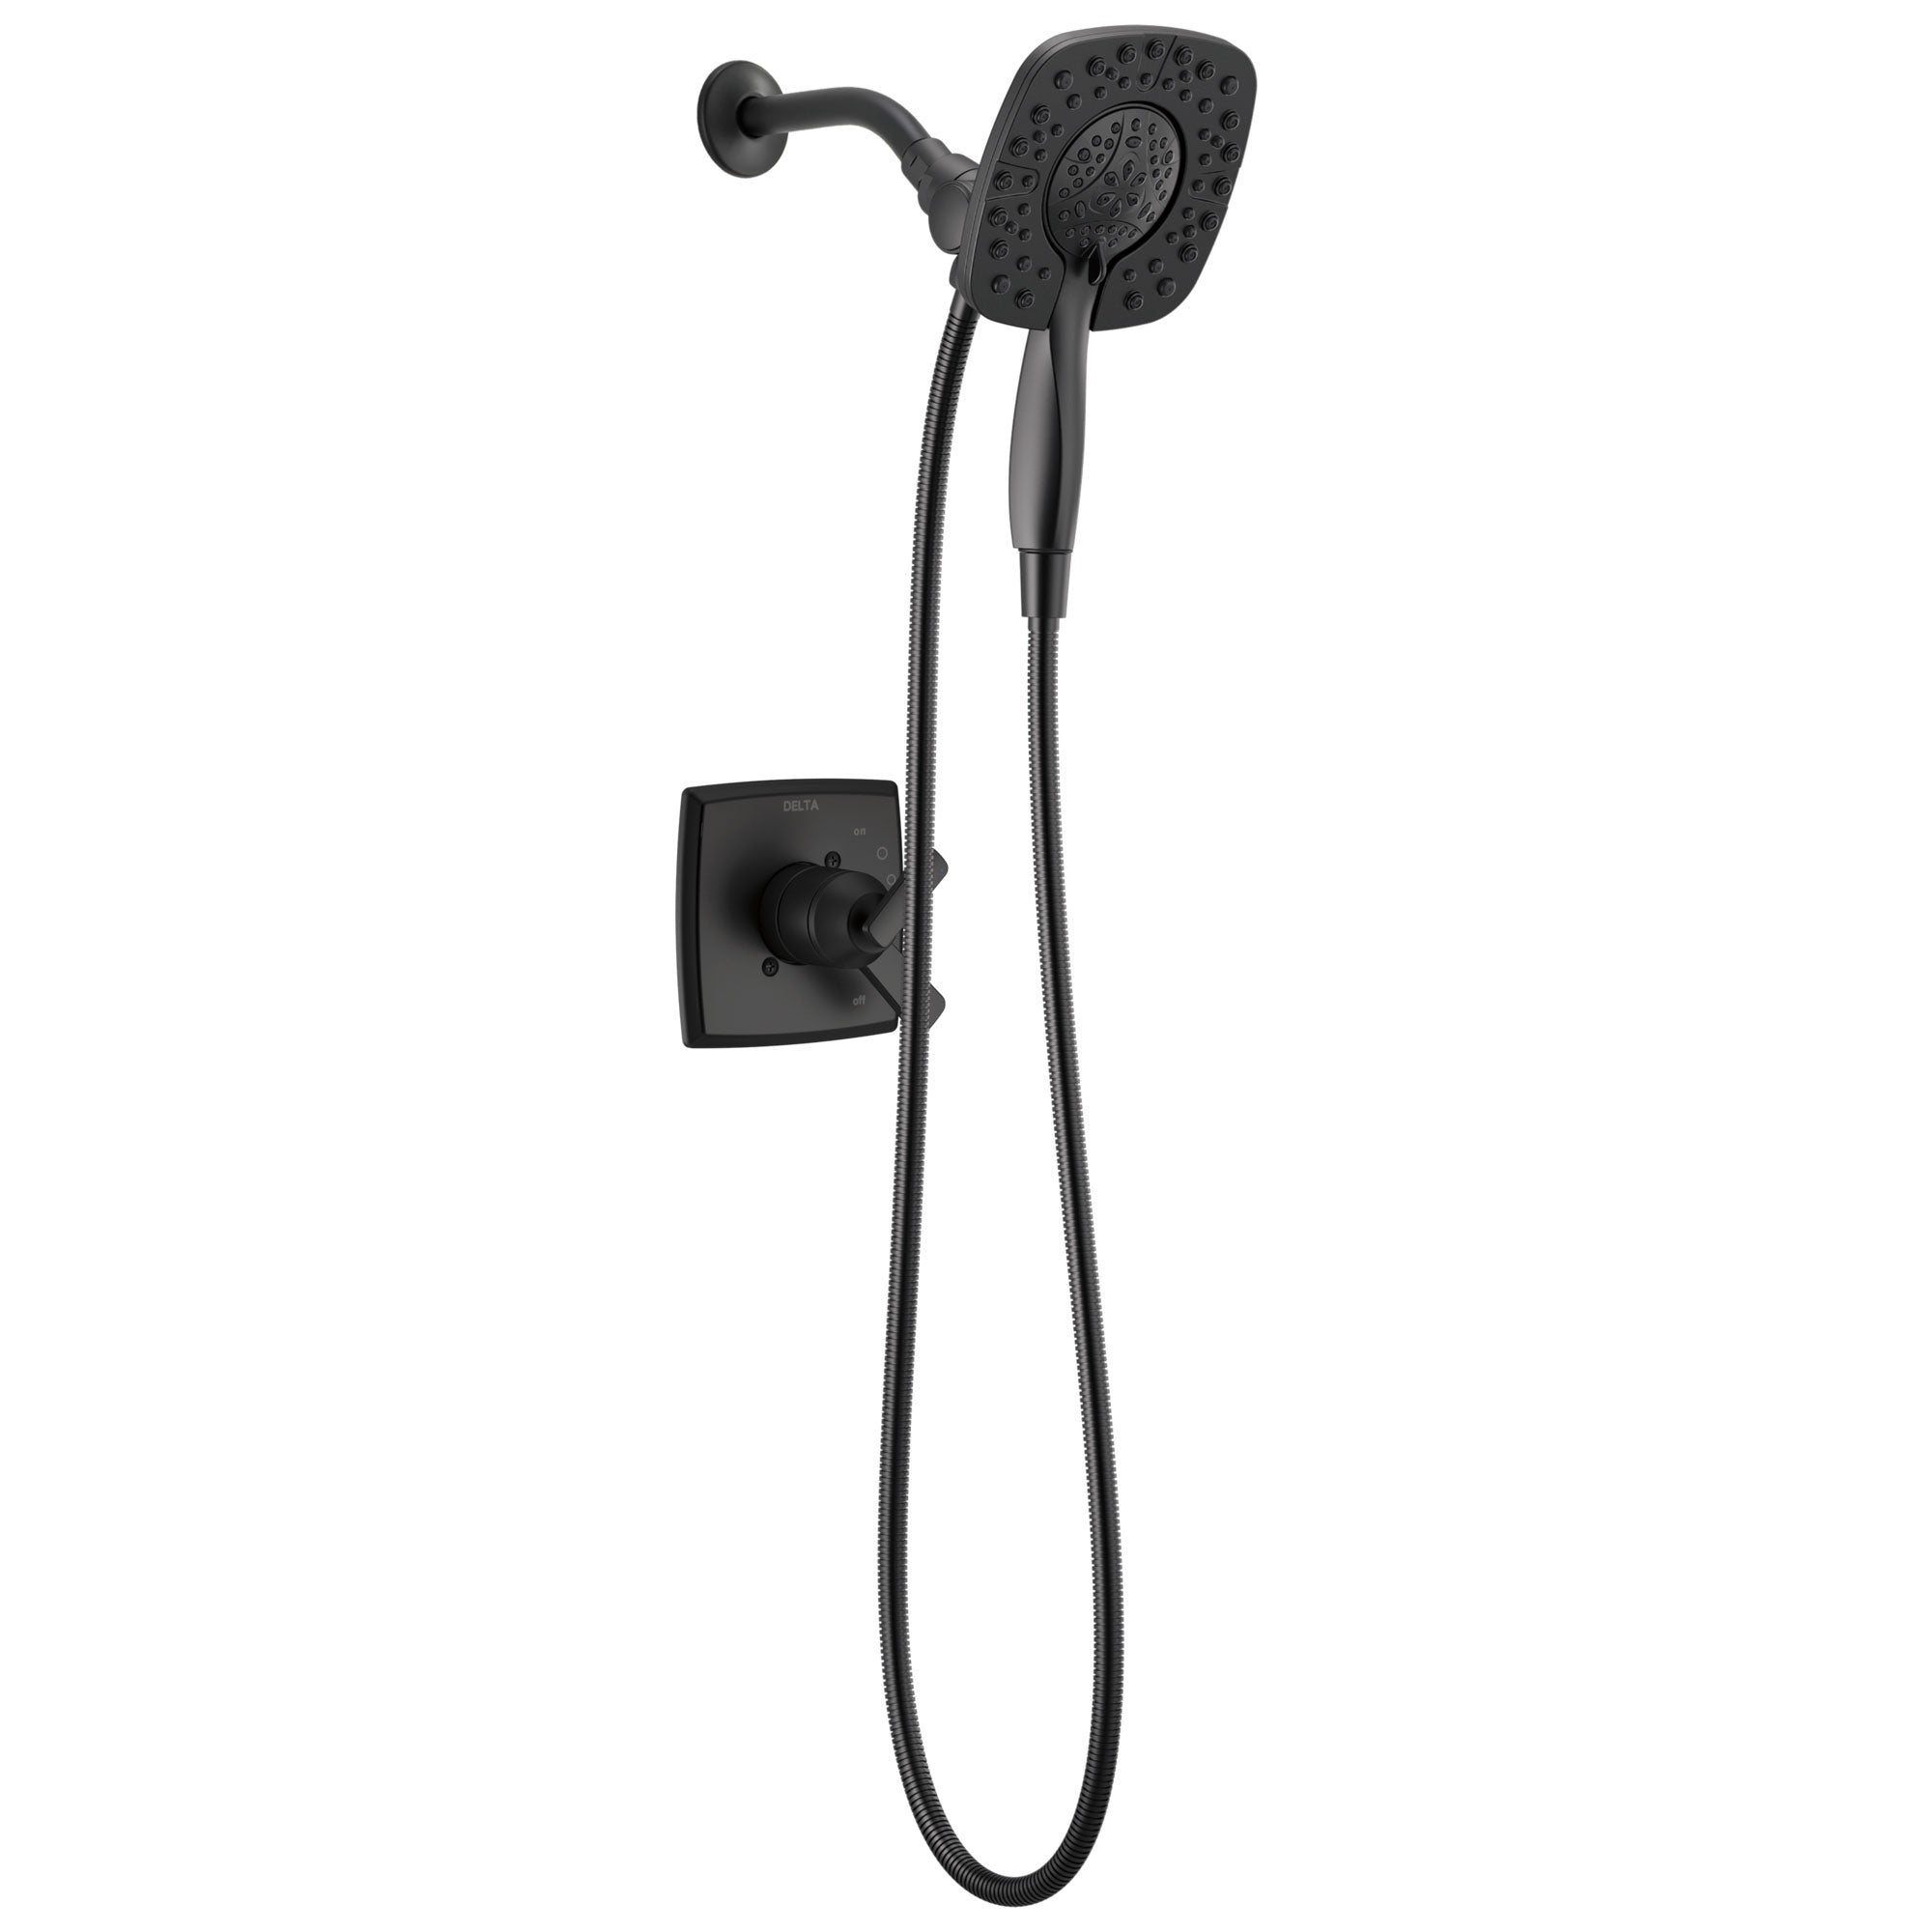 Delta Ashlyn Matte Black Finish Monitor 17 Series In2ition Showerhead/Hand Shower Faucet Includes Handles, Cartridge, and Valve with Stops D3376V